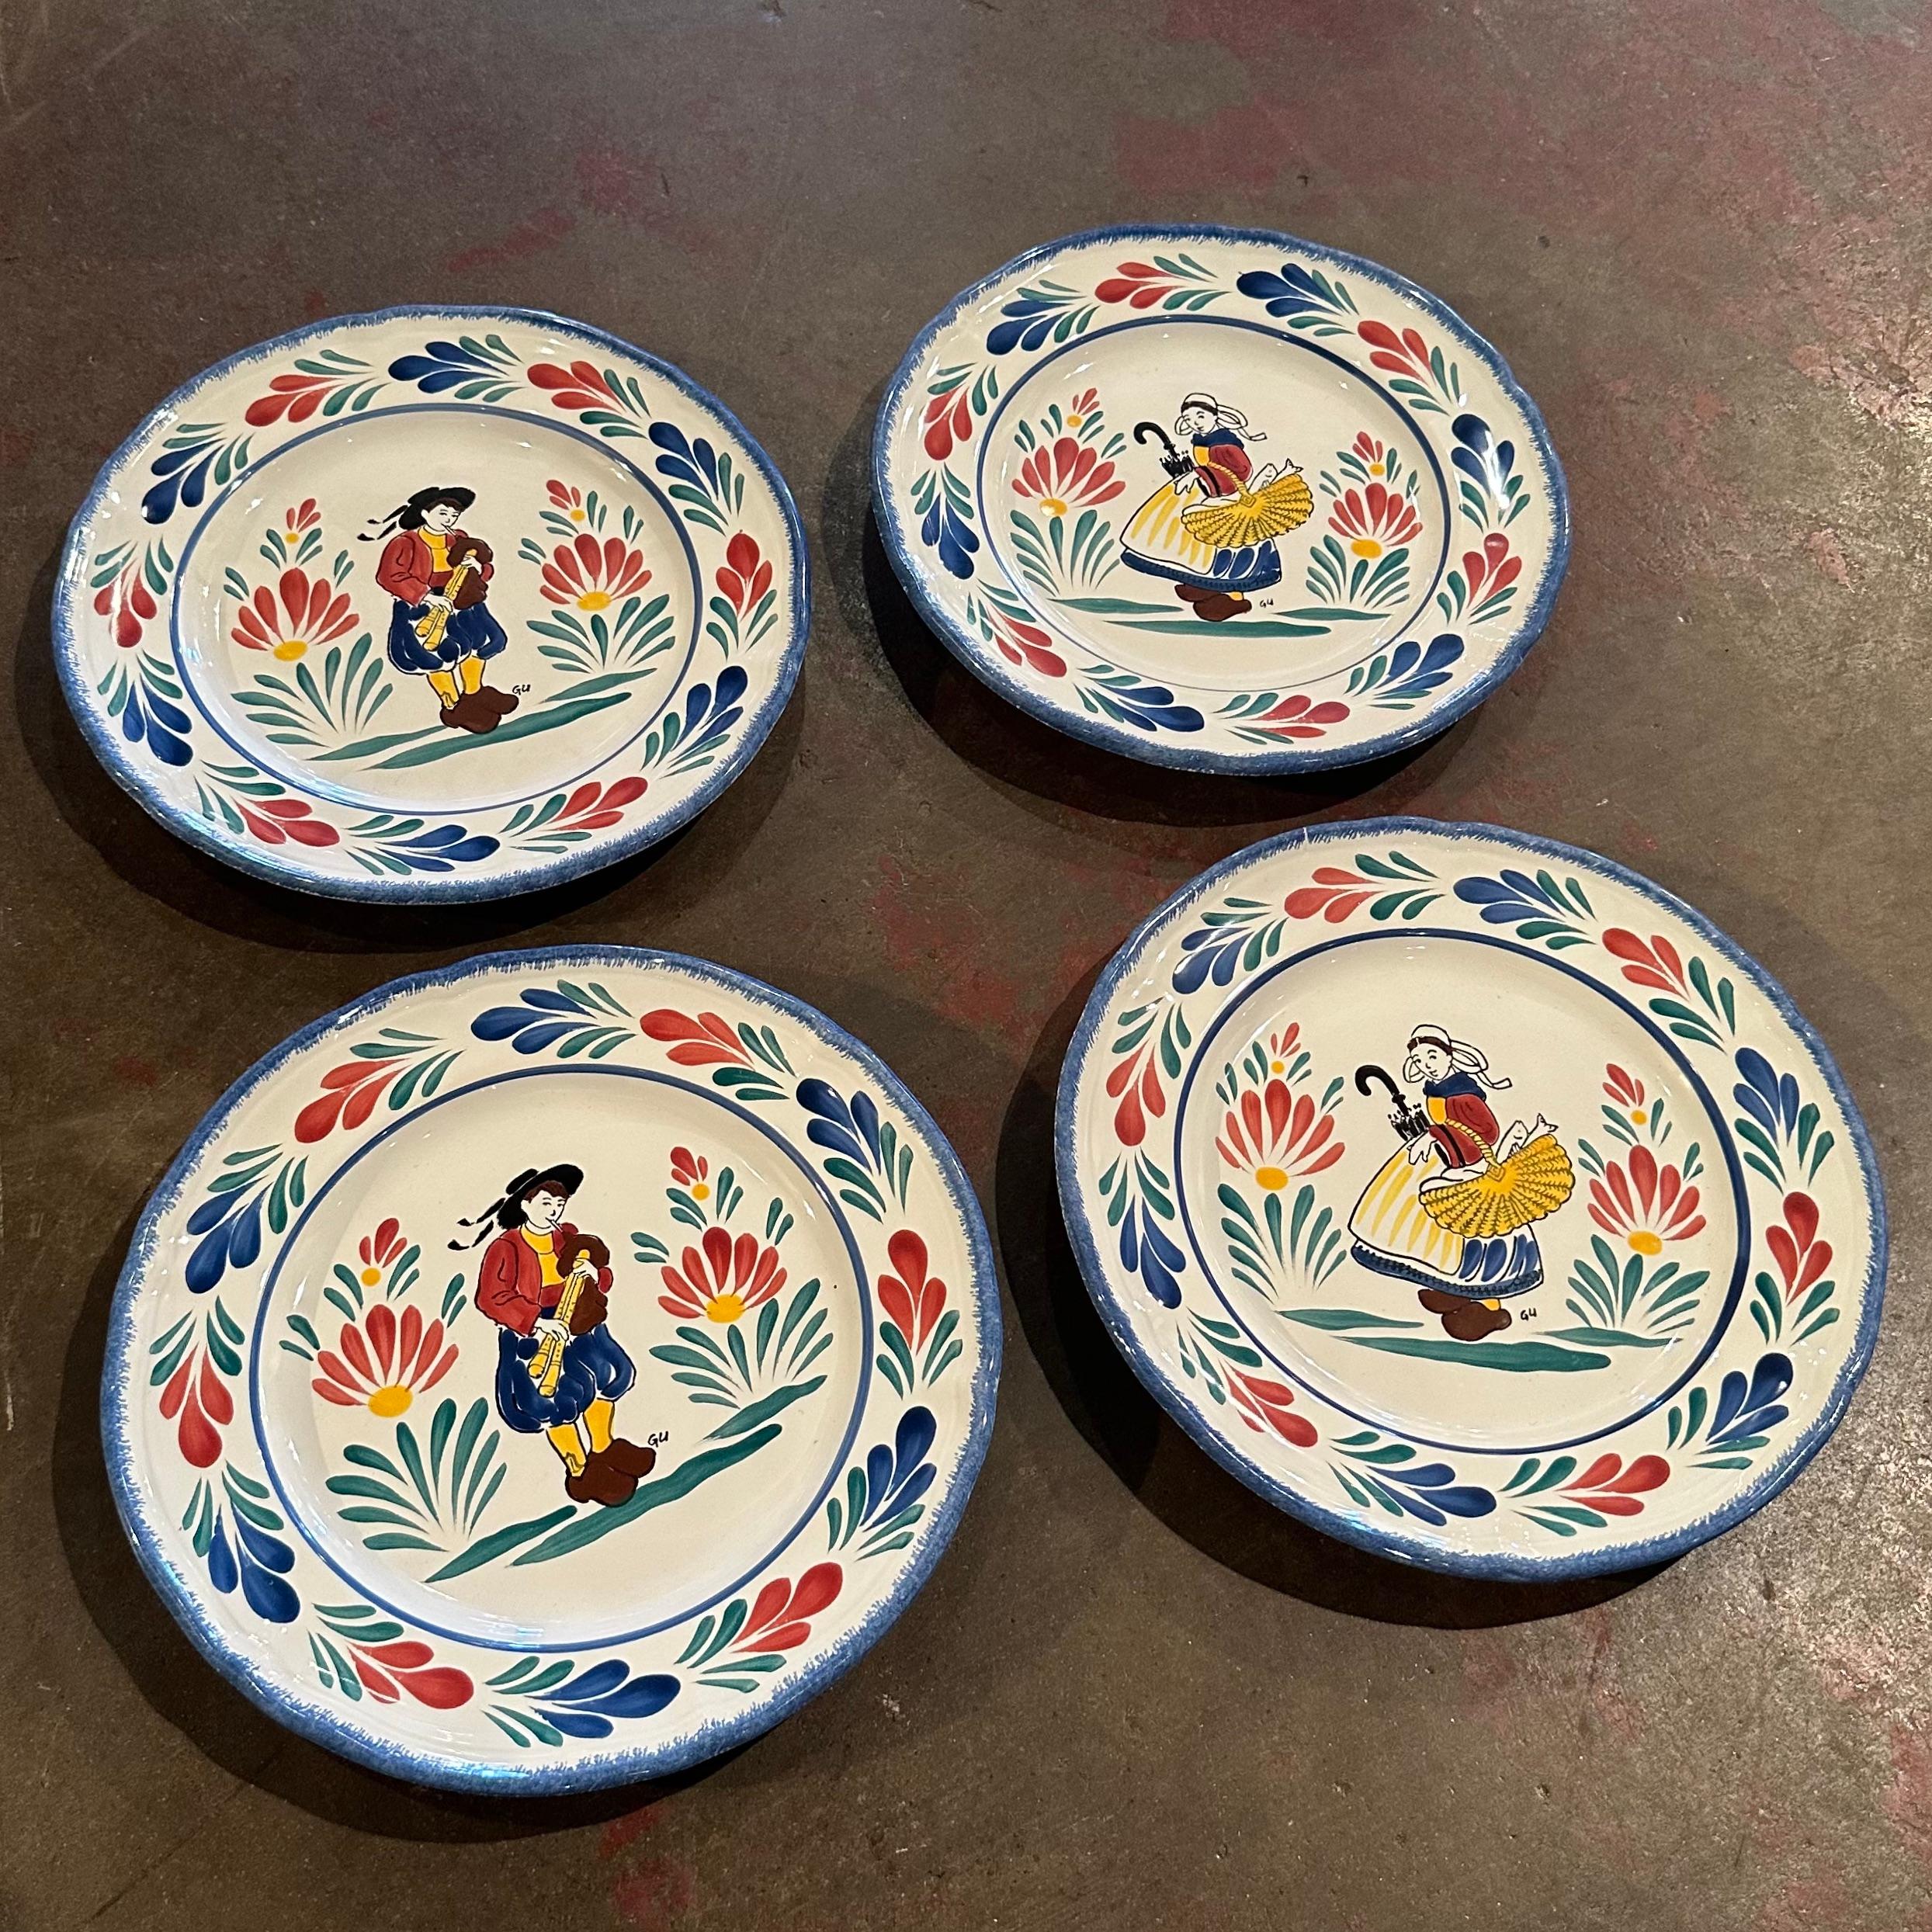 Decorate a shelf with these 2 pair of vintage decorative plates from Brittany, France. Crafted circa 1980, each faience plate is hand painted and features Breton people in traditional costumes in the style of Quimper pottery. The plates are signed